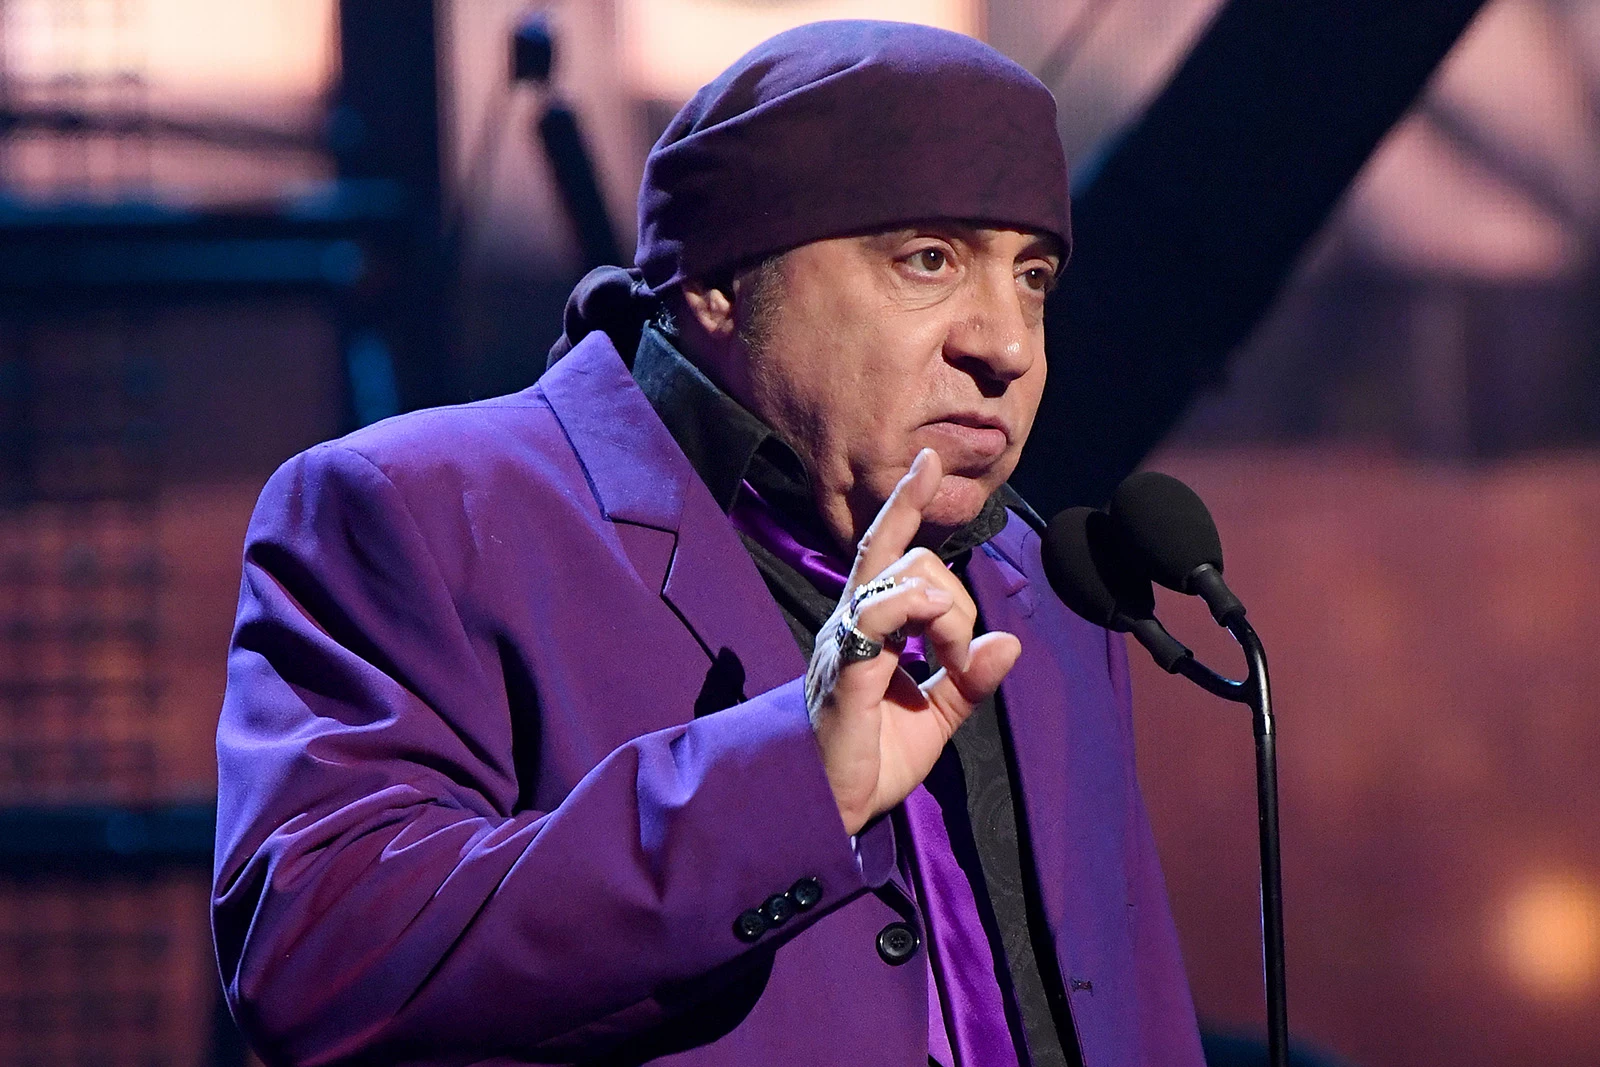 When One of Steven Van Zandts Heroes Pulled a Gun on image